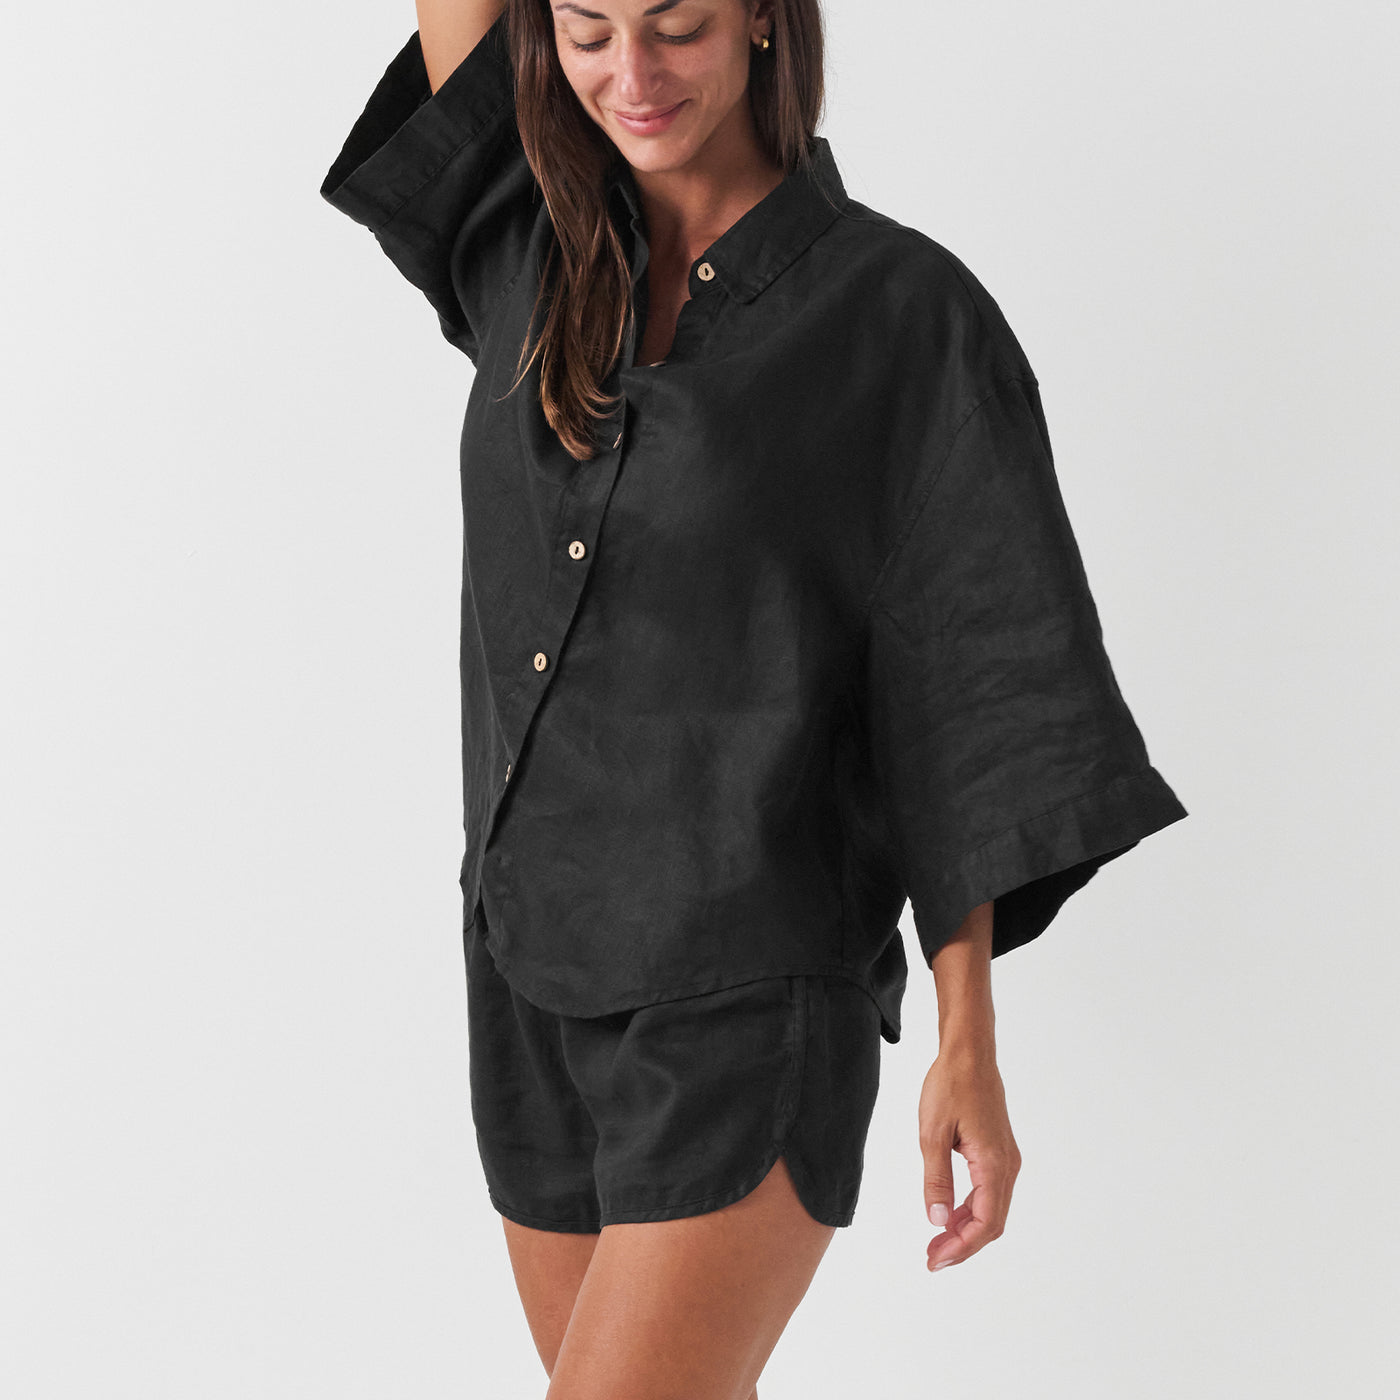 French Flax Linen Relaxed Short in Black